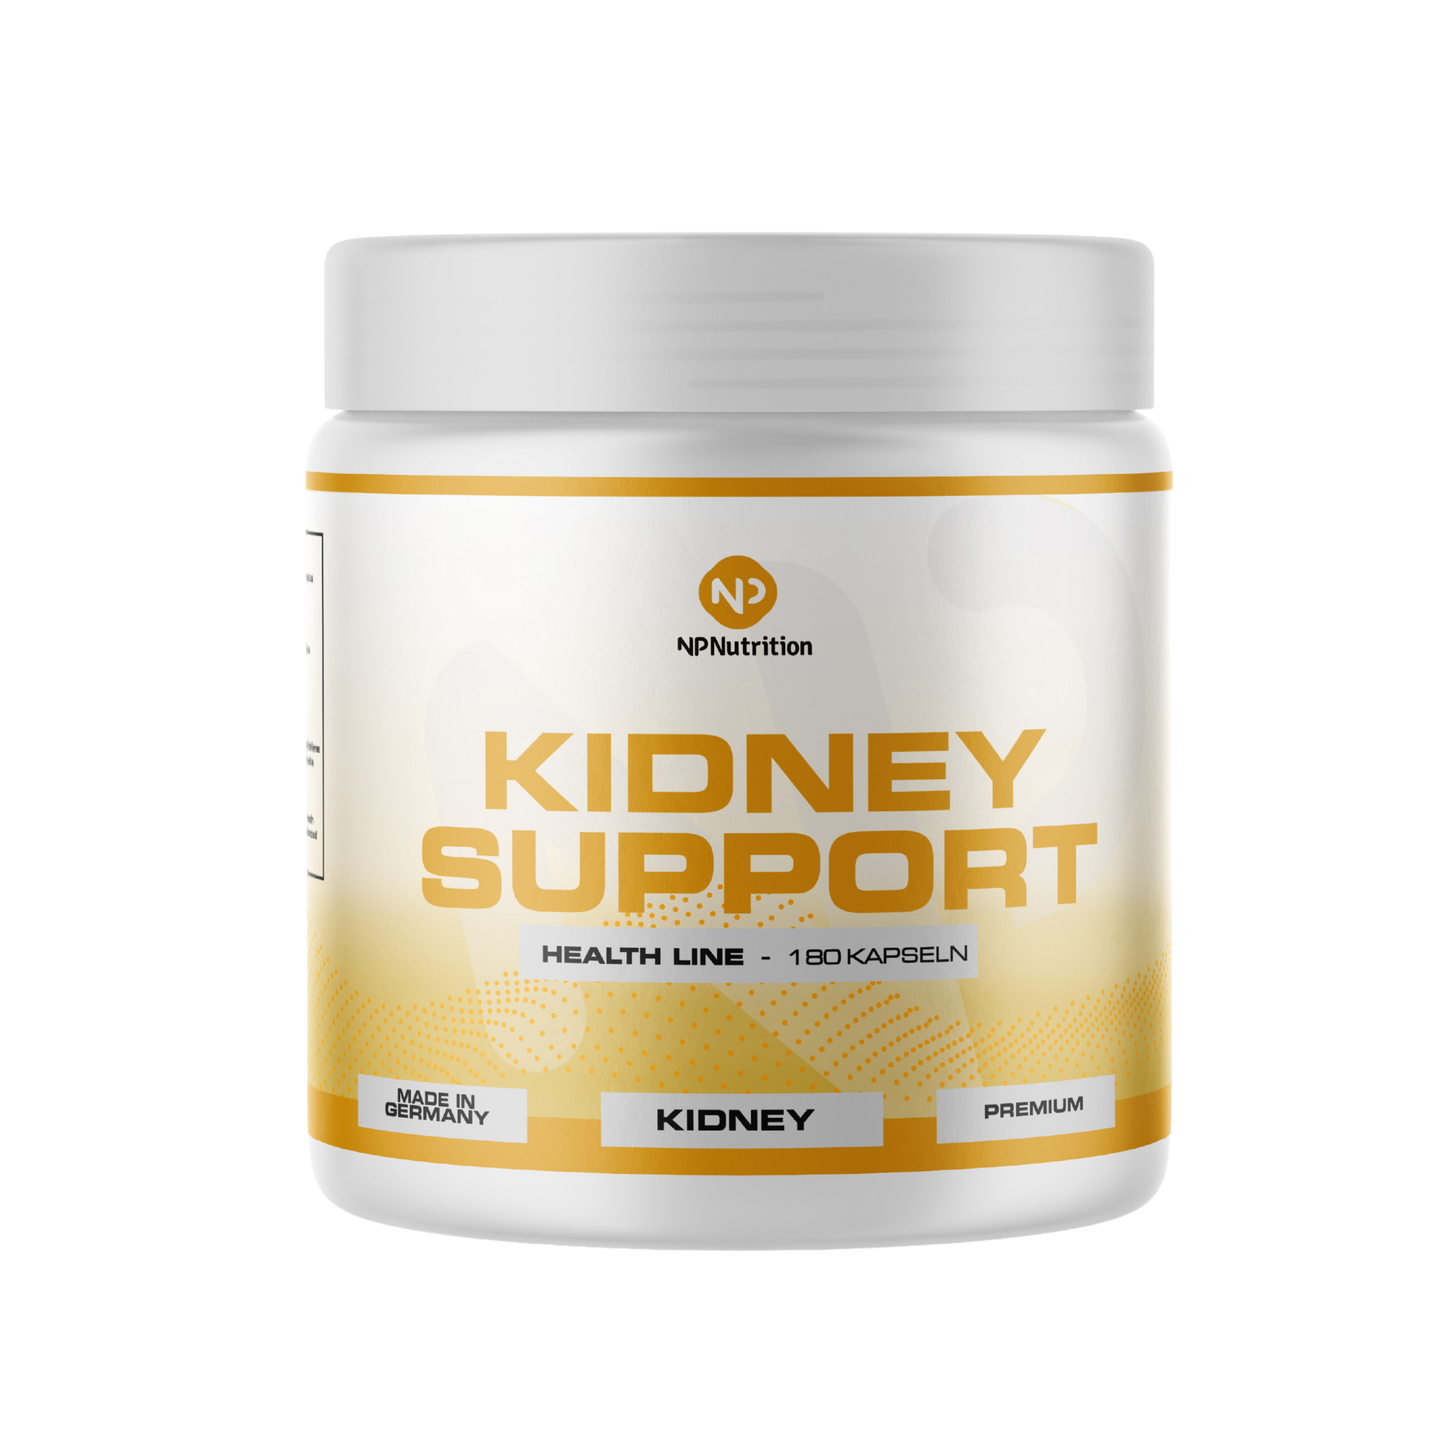 NP Nutrition - Kidney Support